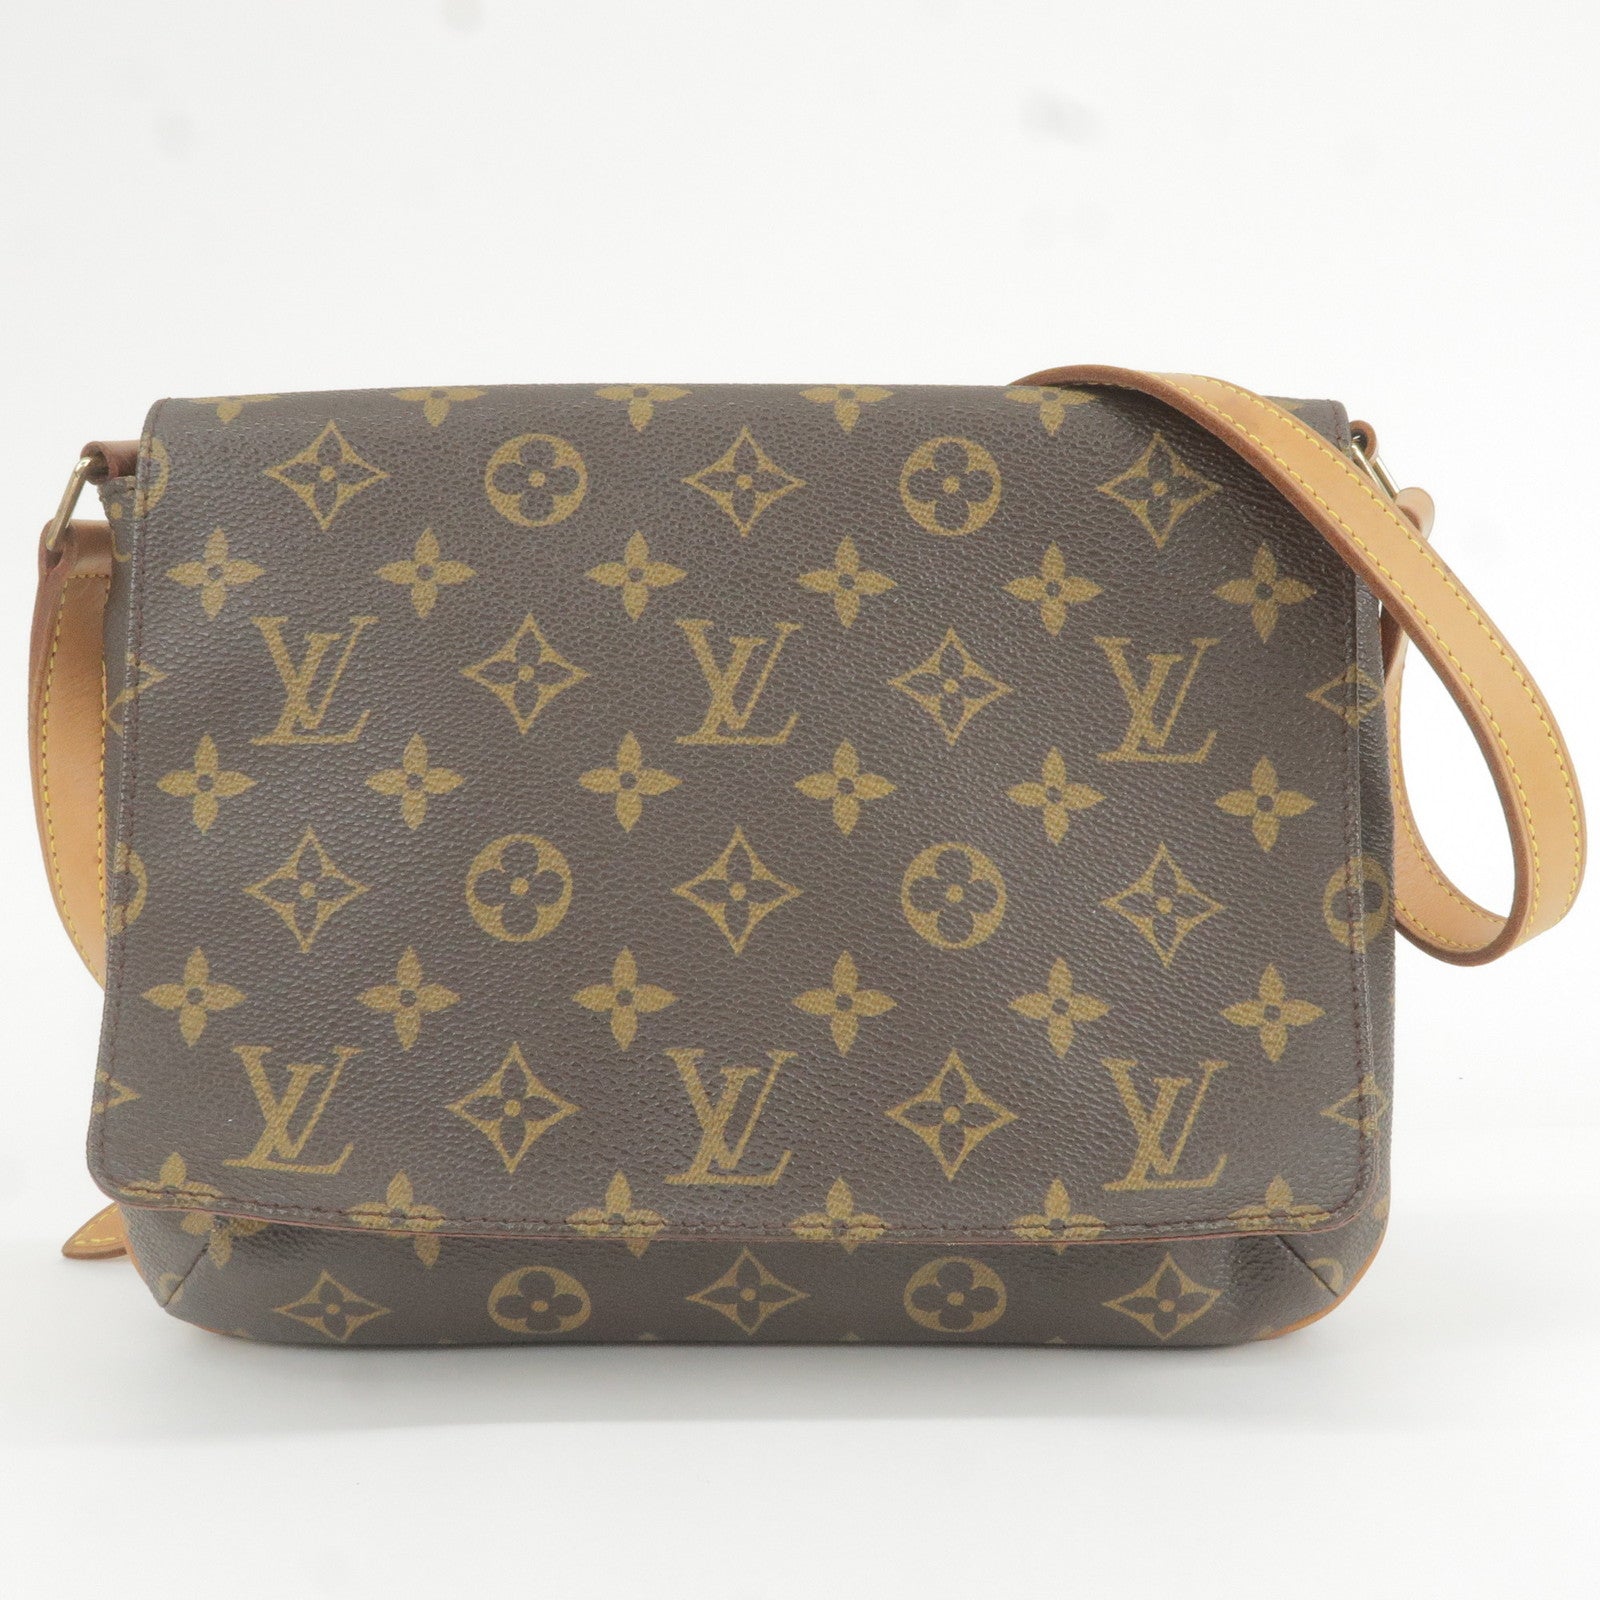 Louis Vuitton America's Cup bag in red monogram canvas and natural beige